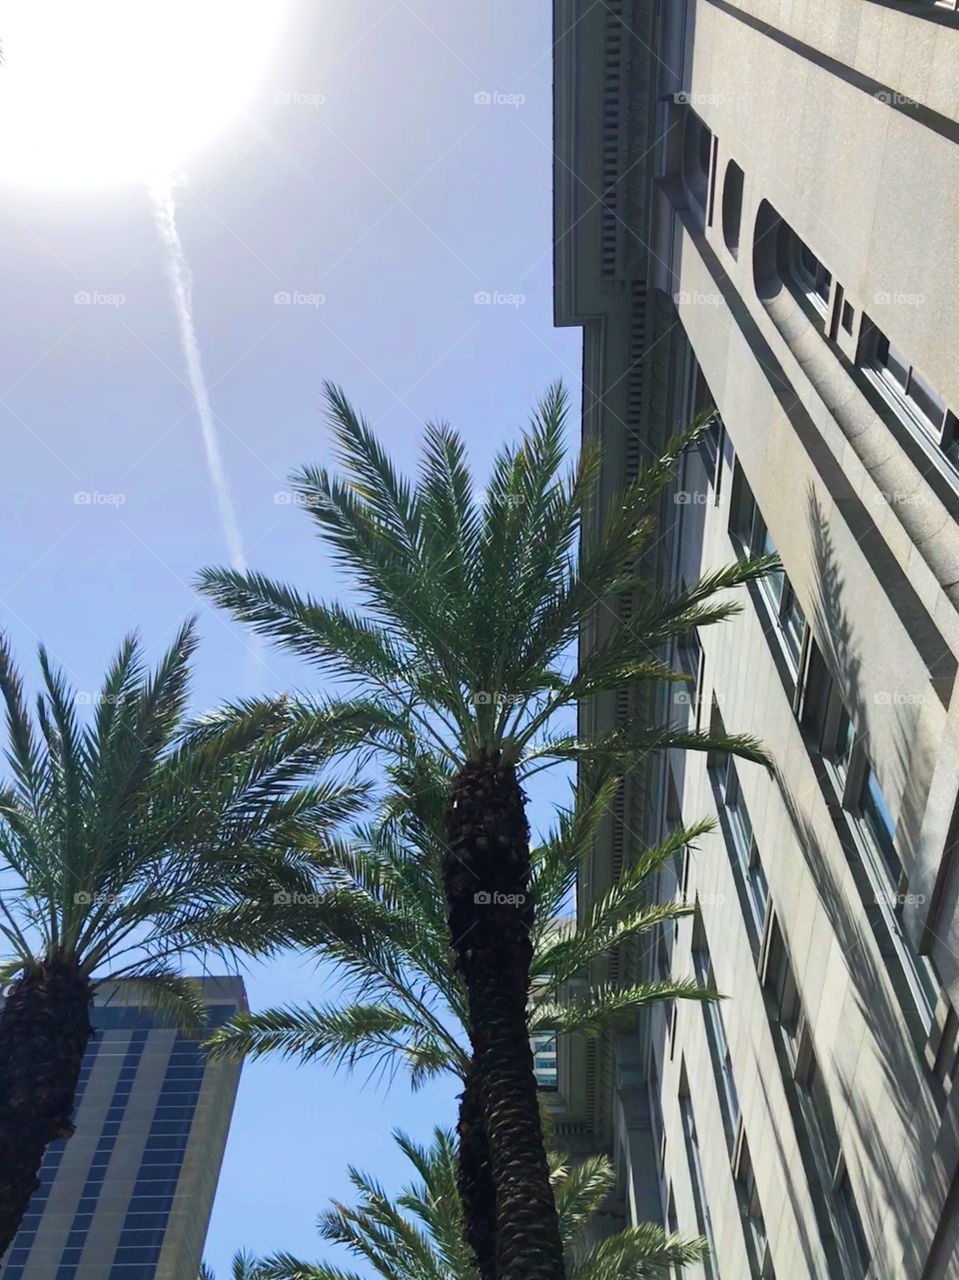 Palms on Canal Street in New Orleans